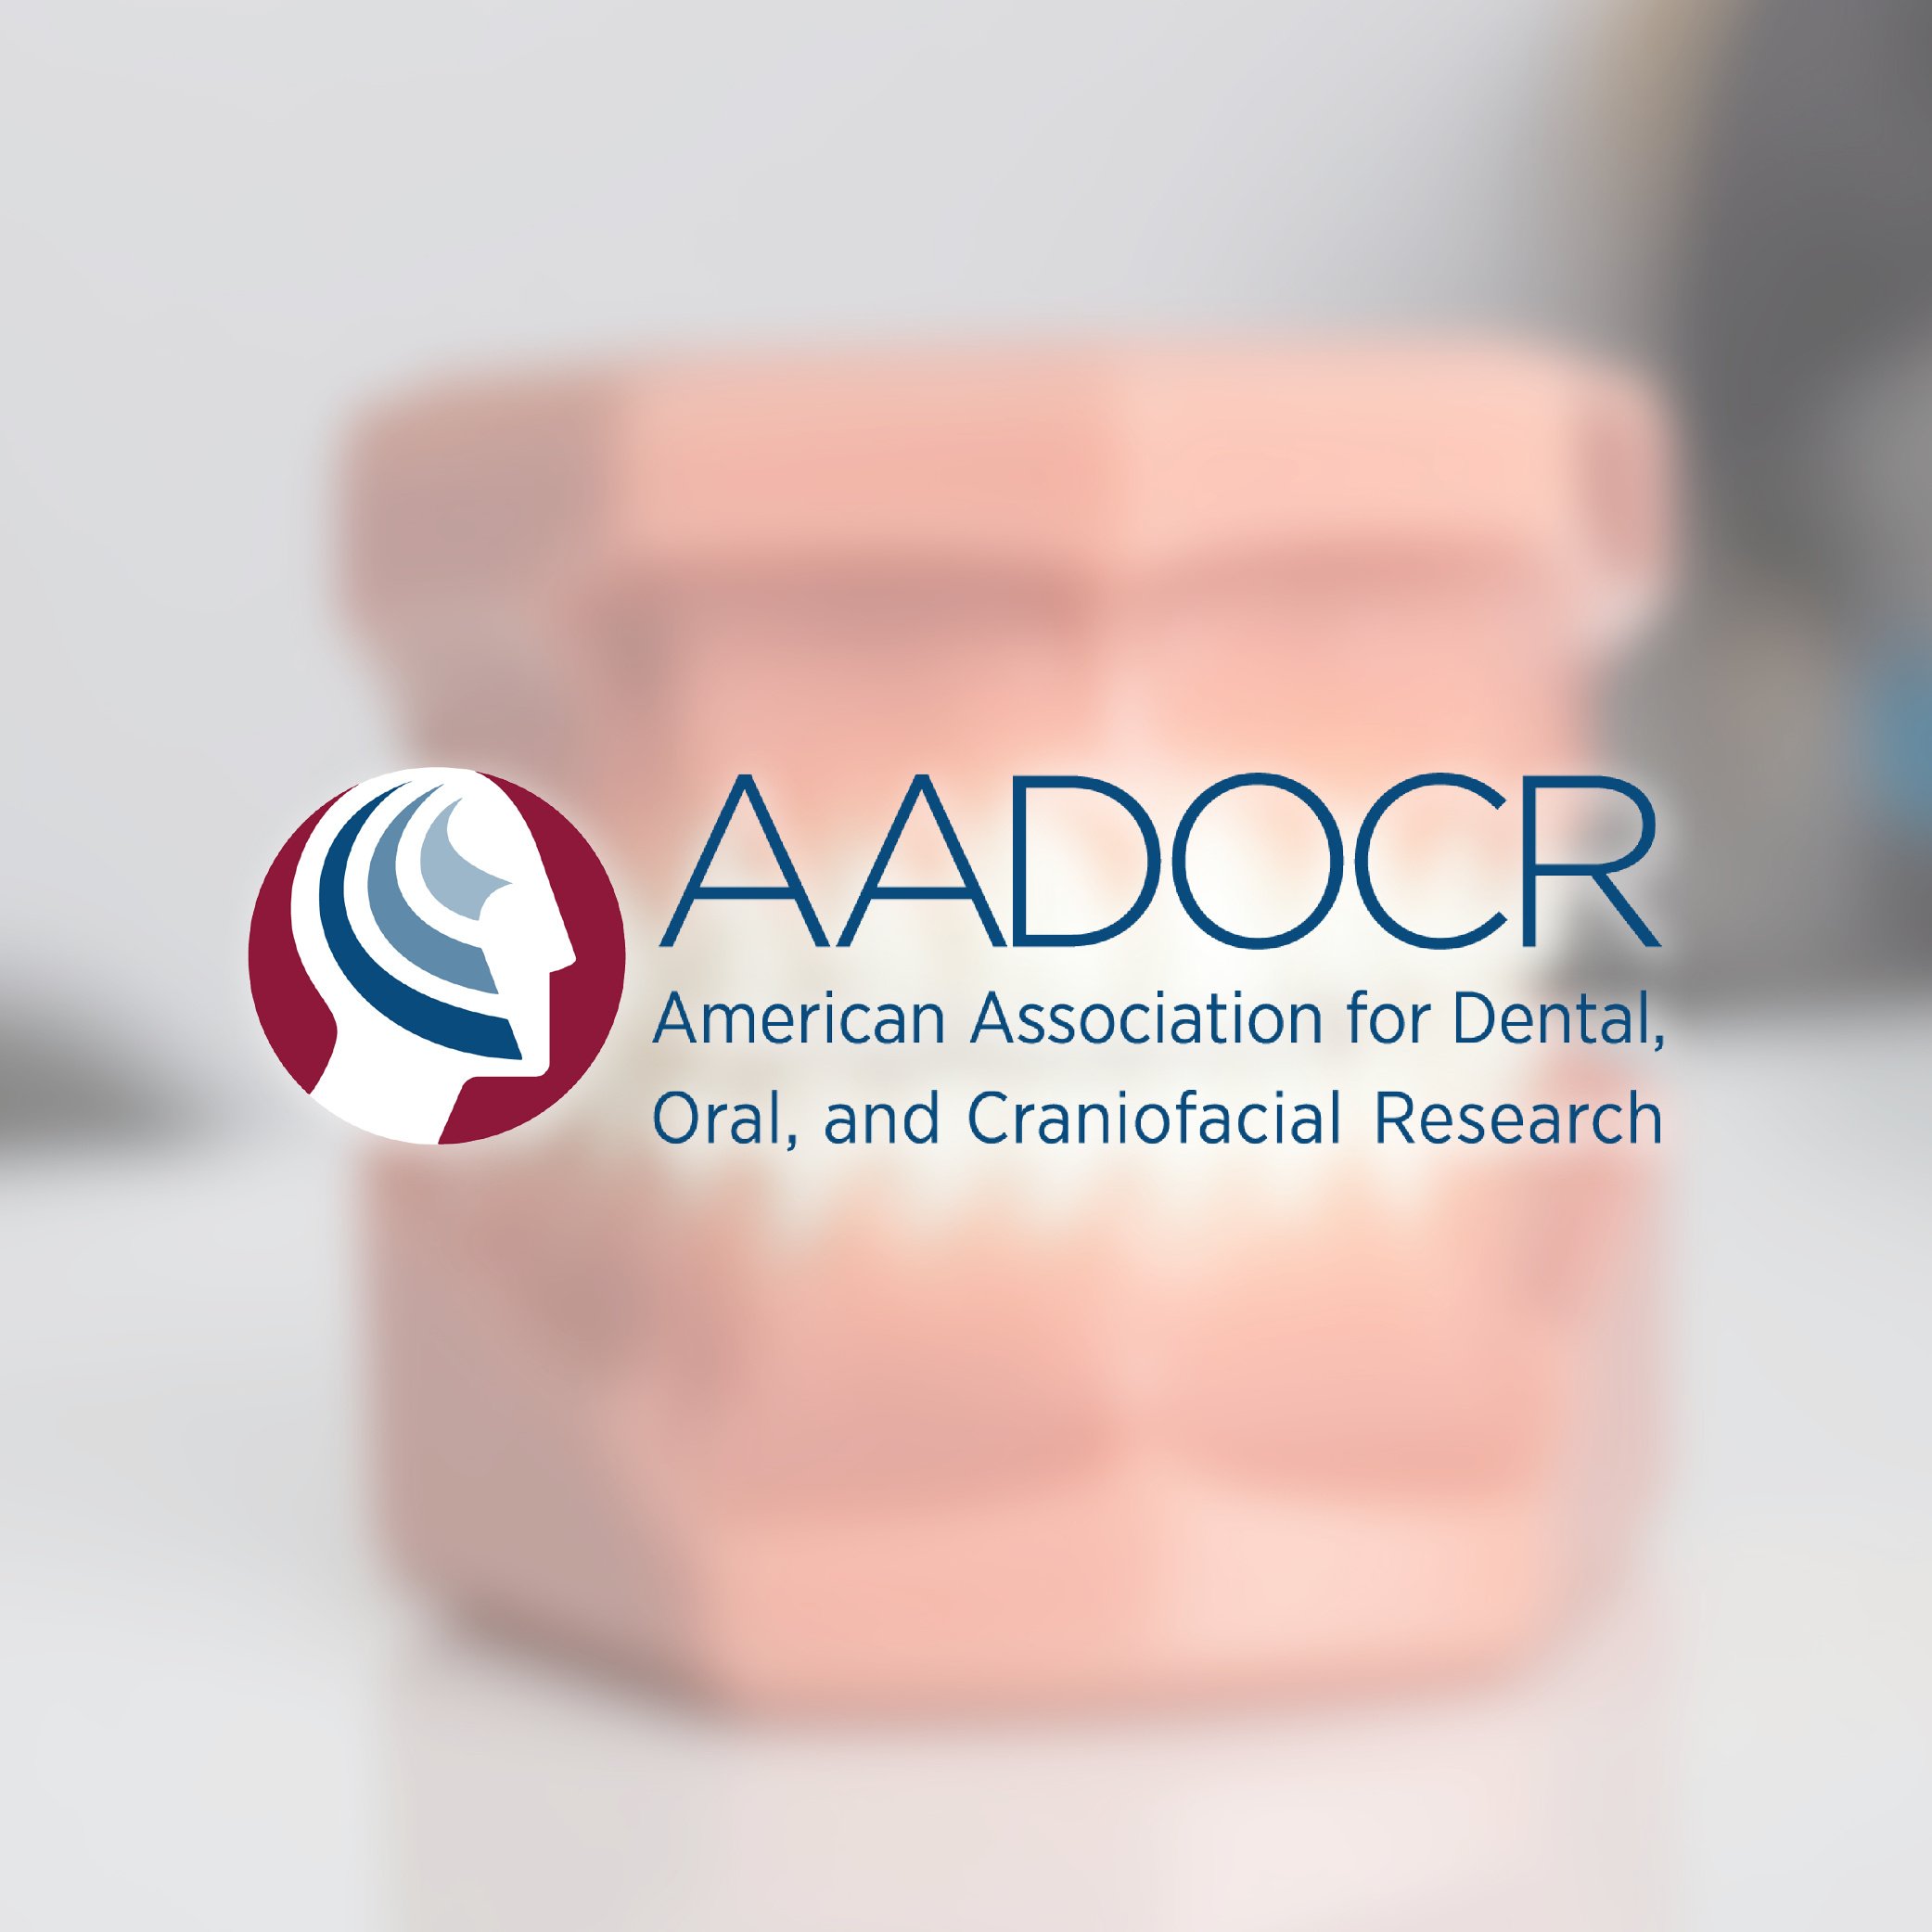 American Association for Dental, Oral, and Craniofacial Research